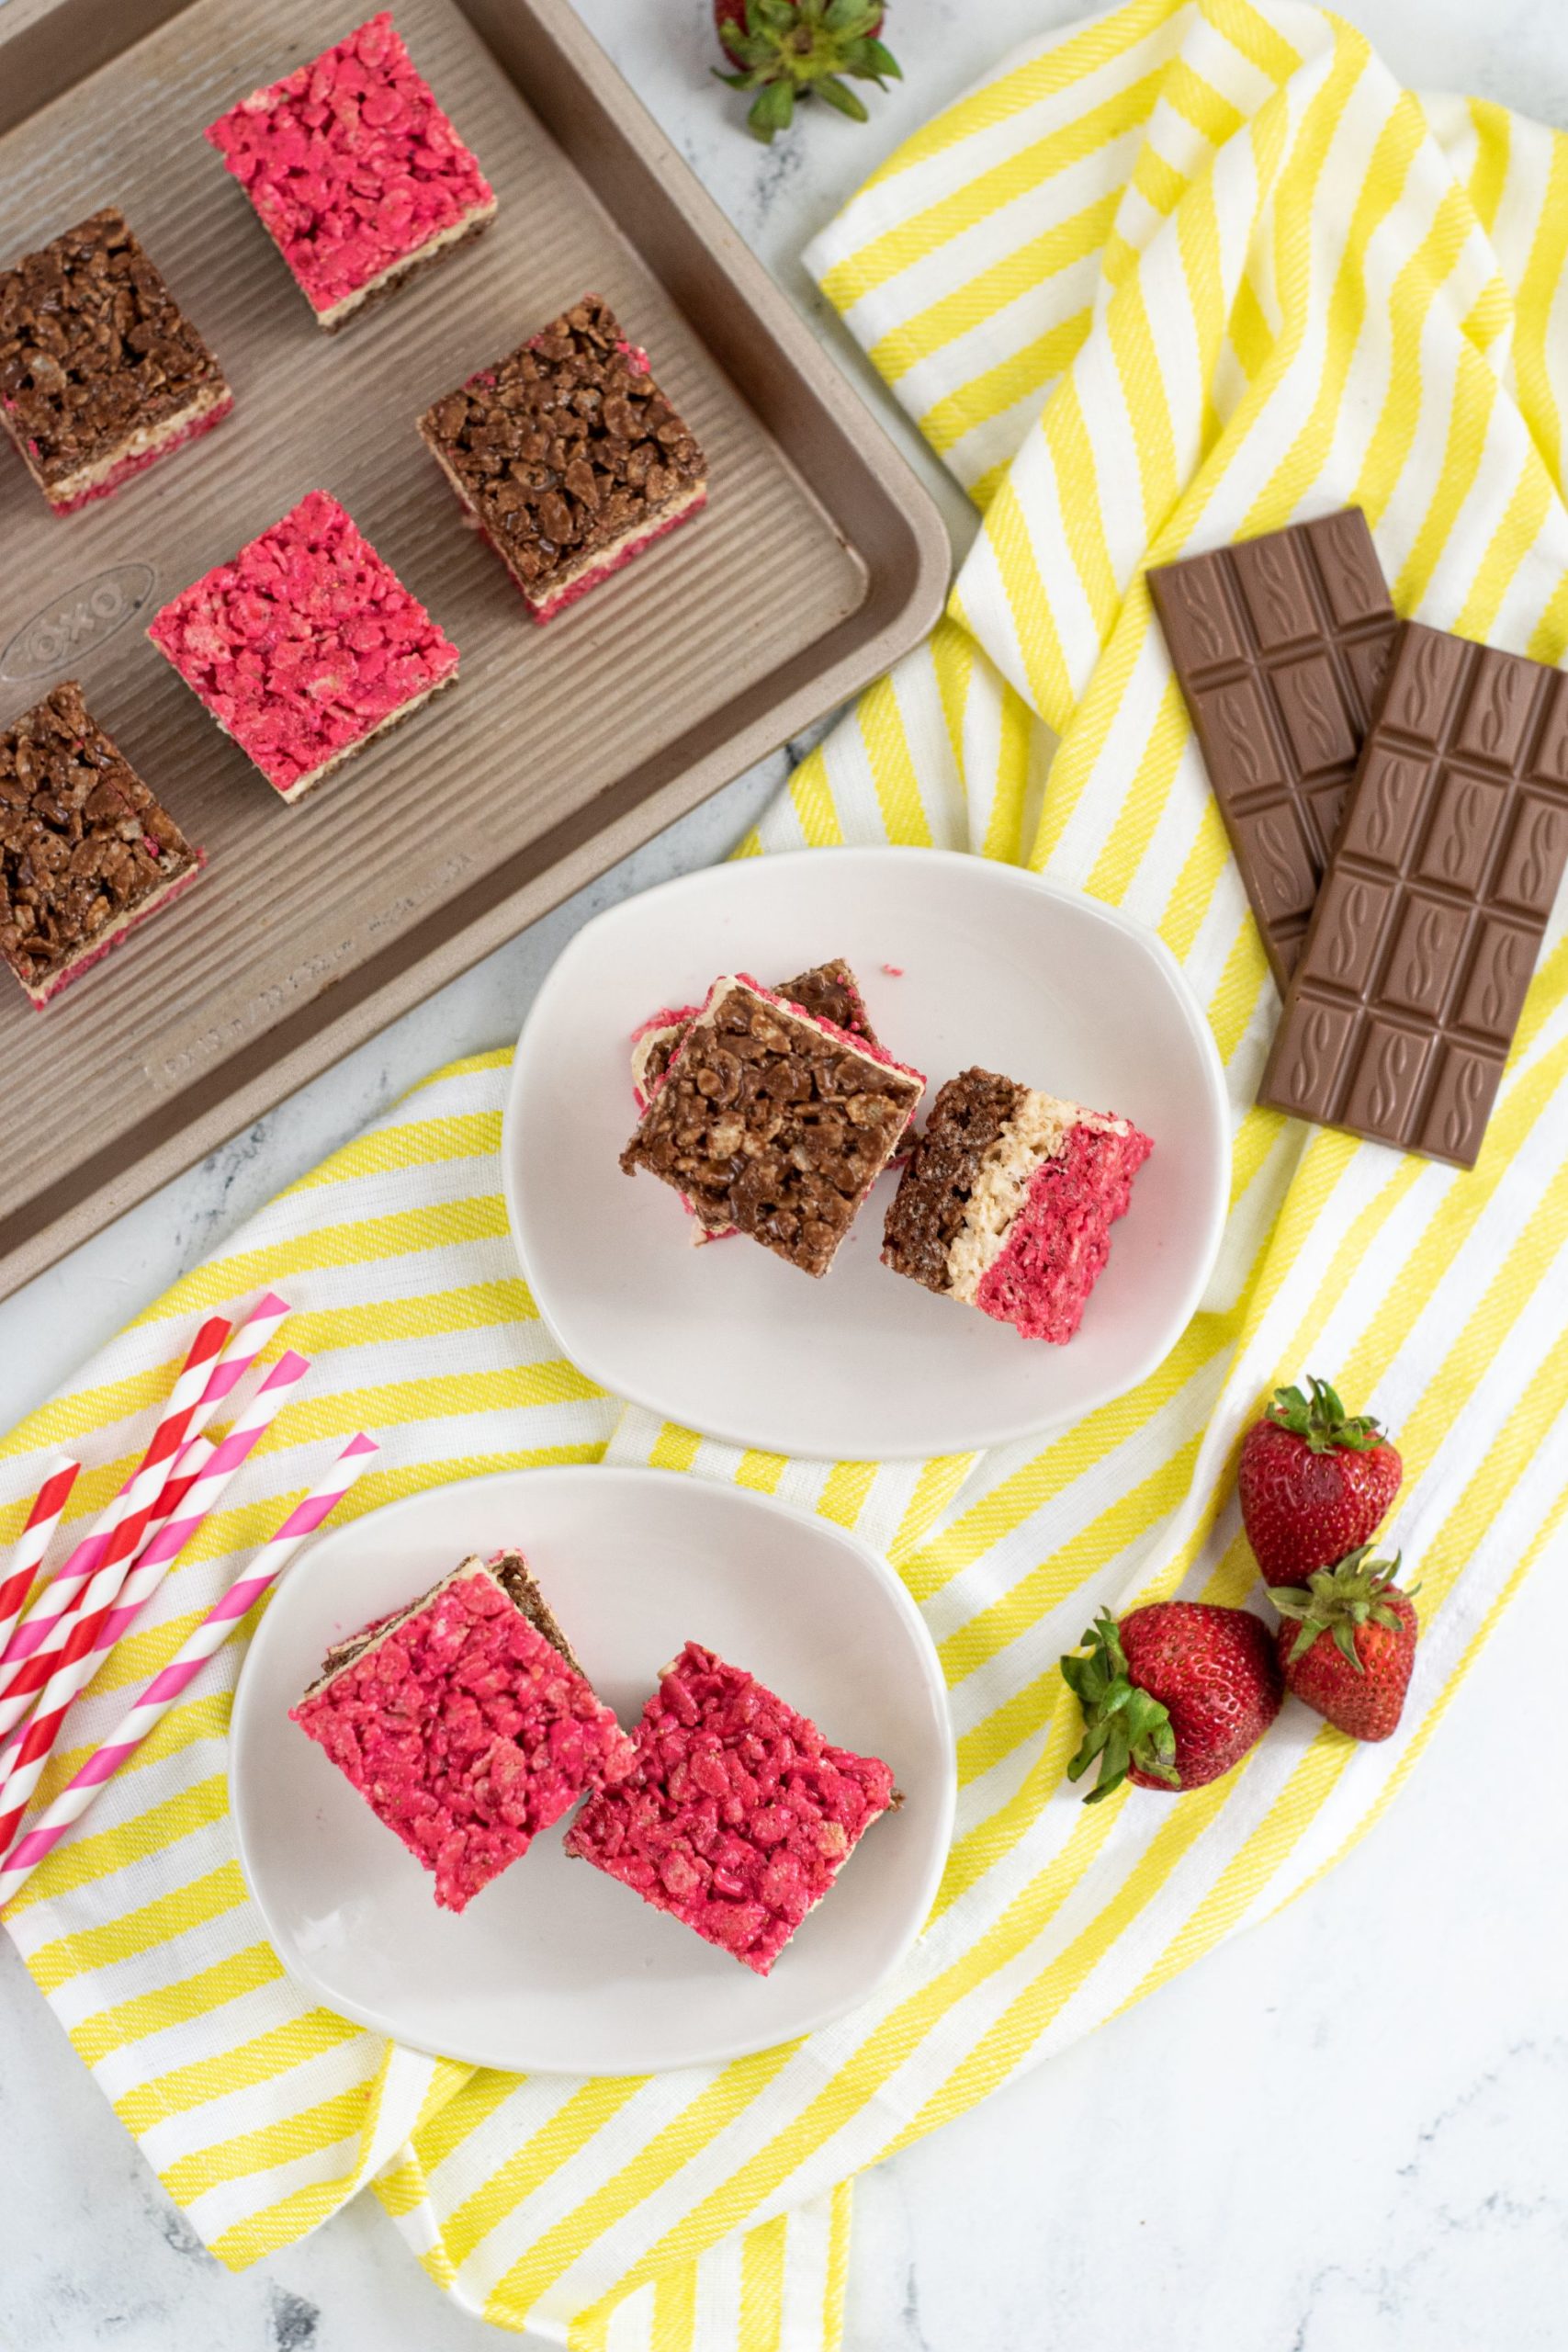 A tray of Treats. Chocolate and strawberry.